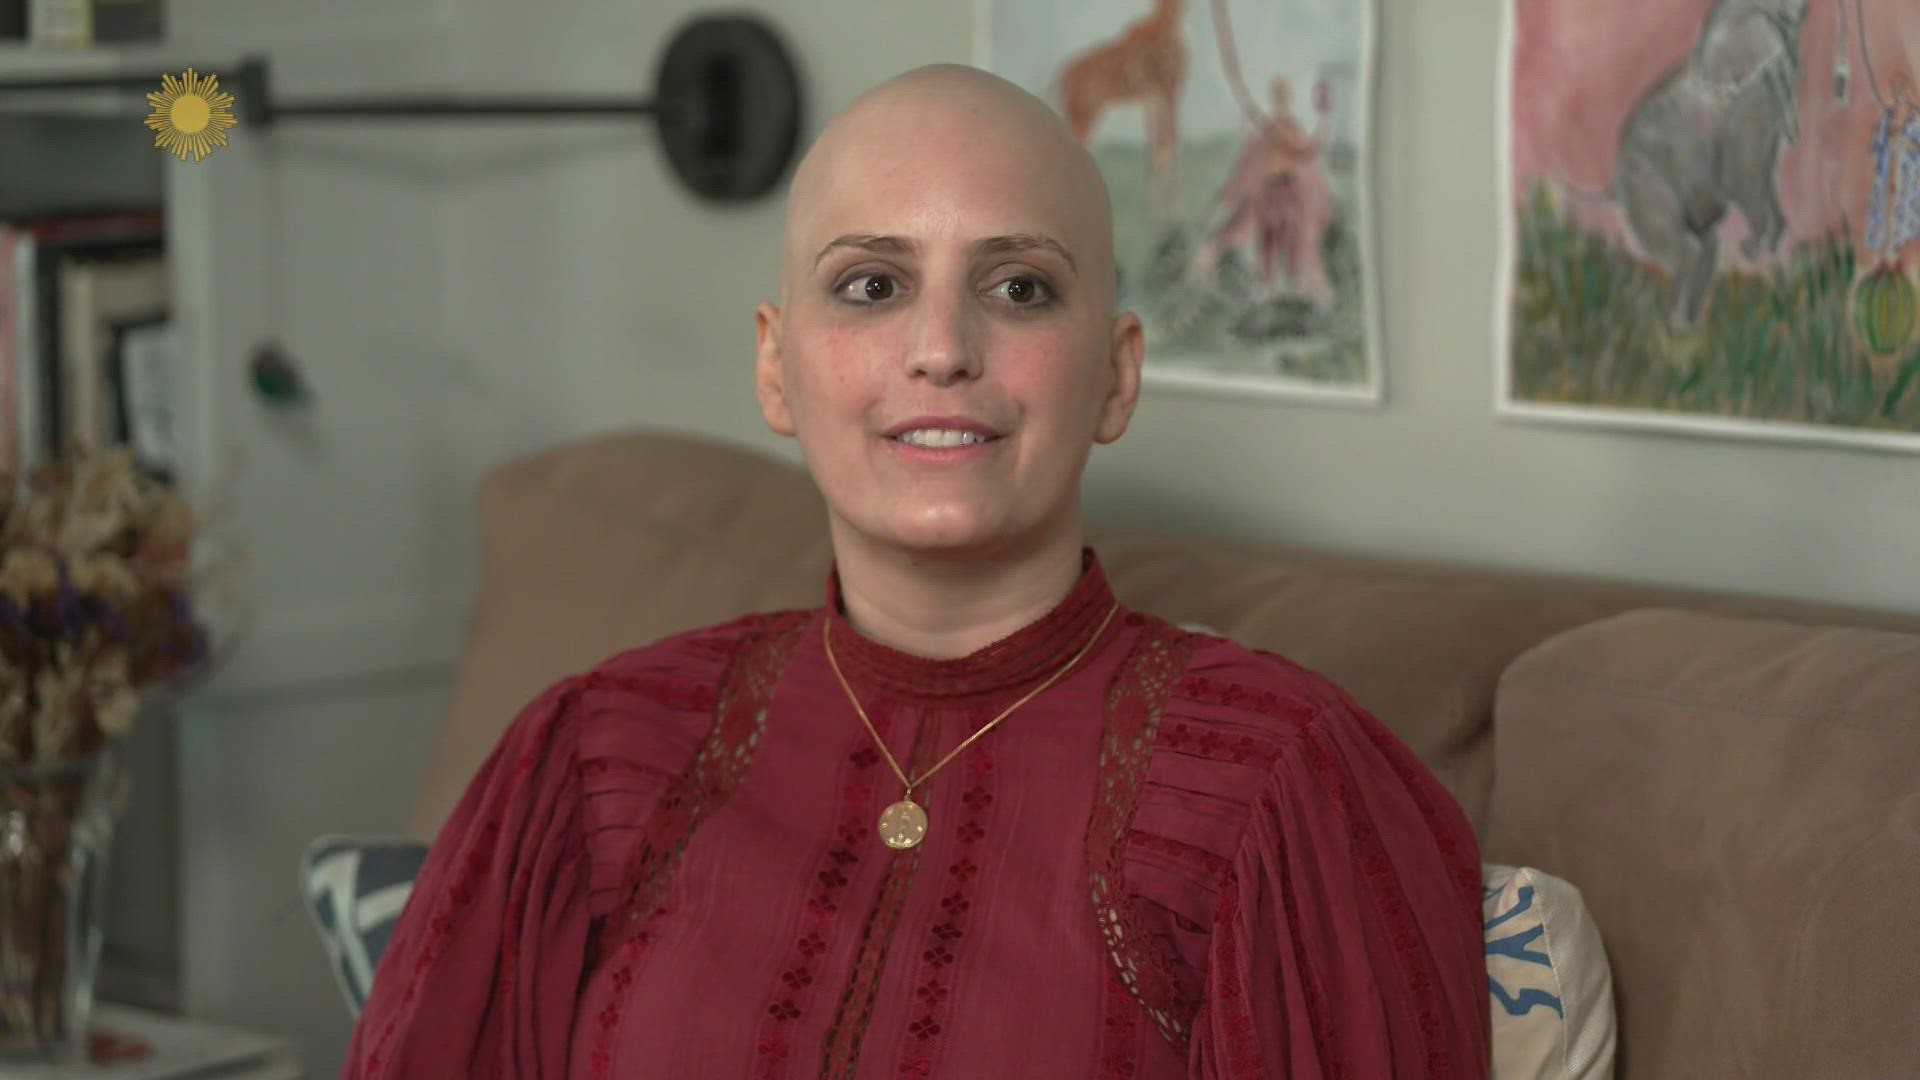 “We got married the day before I was admitted to the hospital to undergo my bone marrow transplant,” Suleika Jaouad, 33.